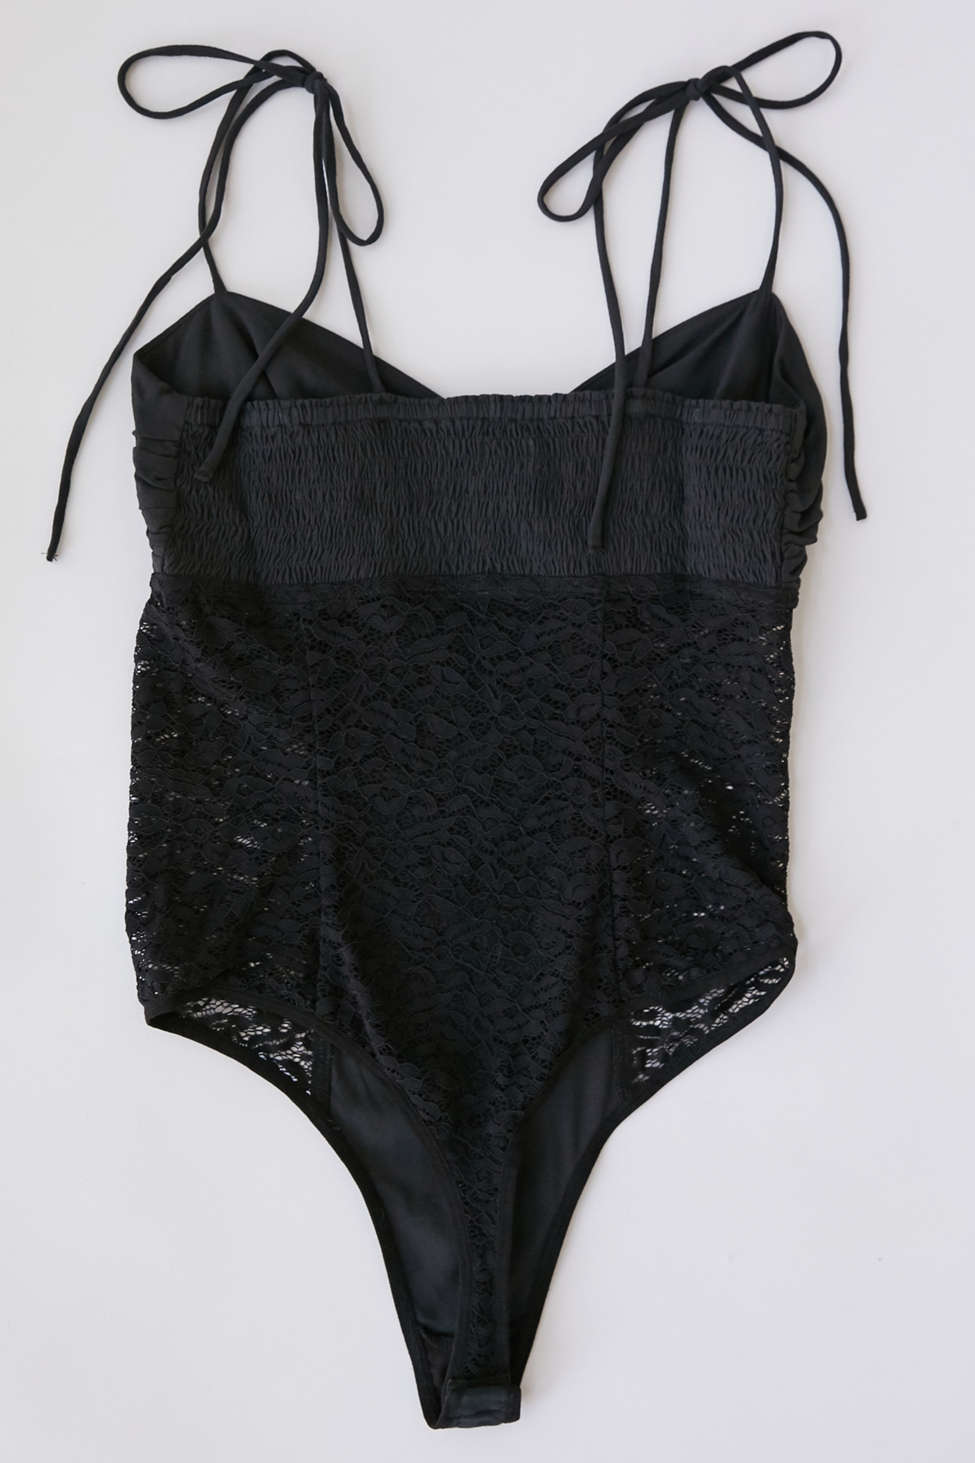 Out From Under Next To Me Lace Panel Bodysuit | Urban Outfitters